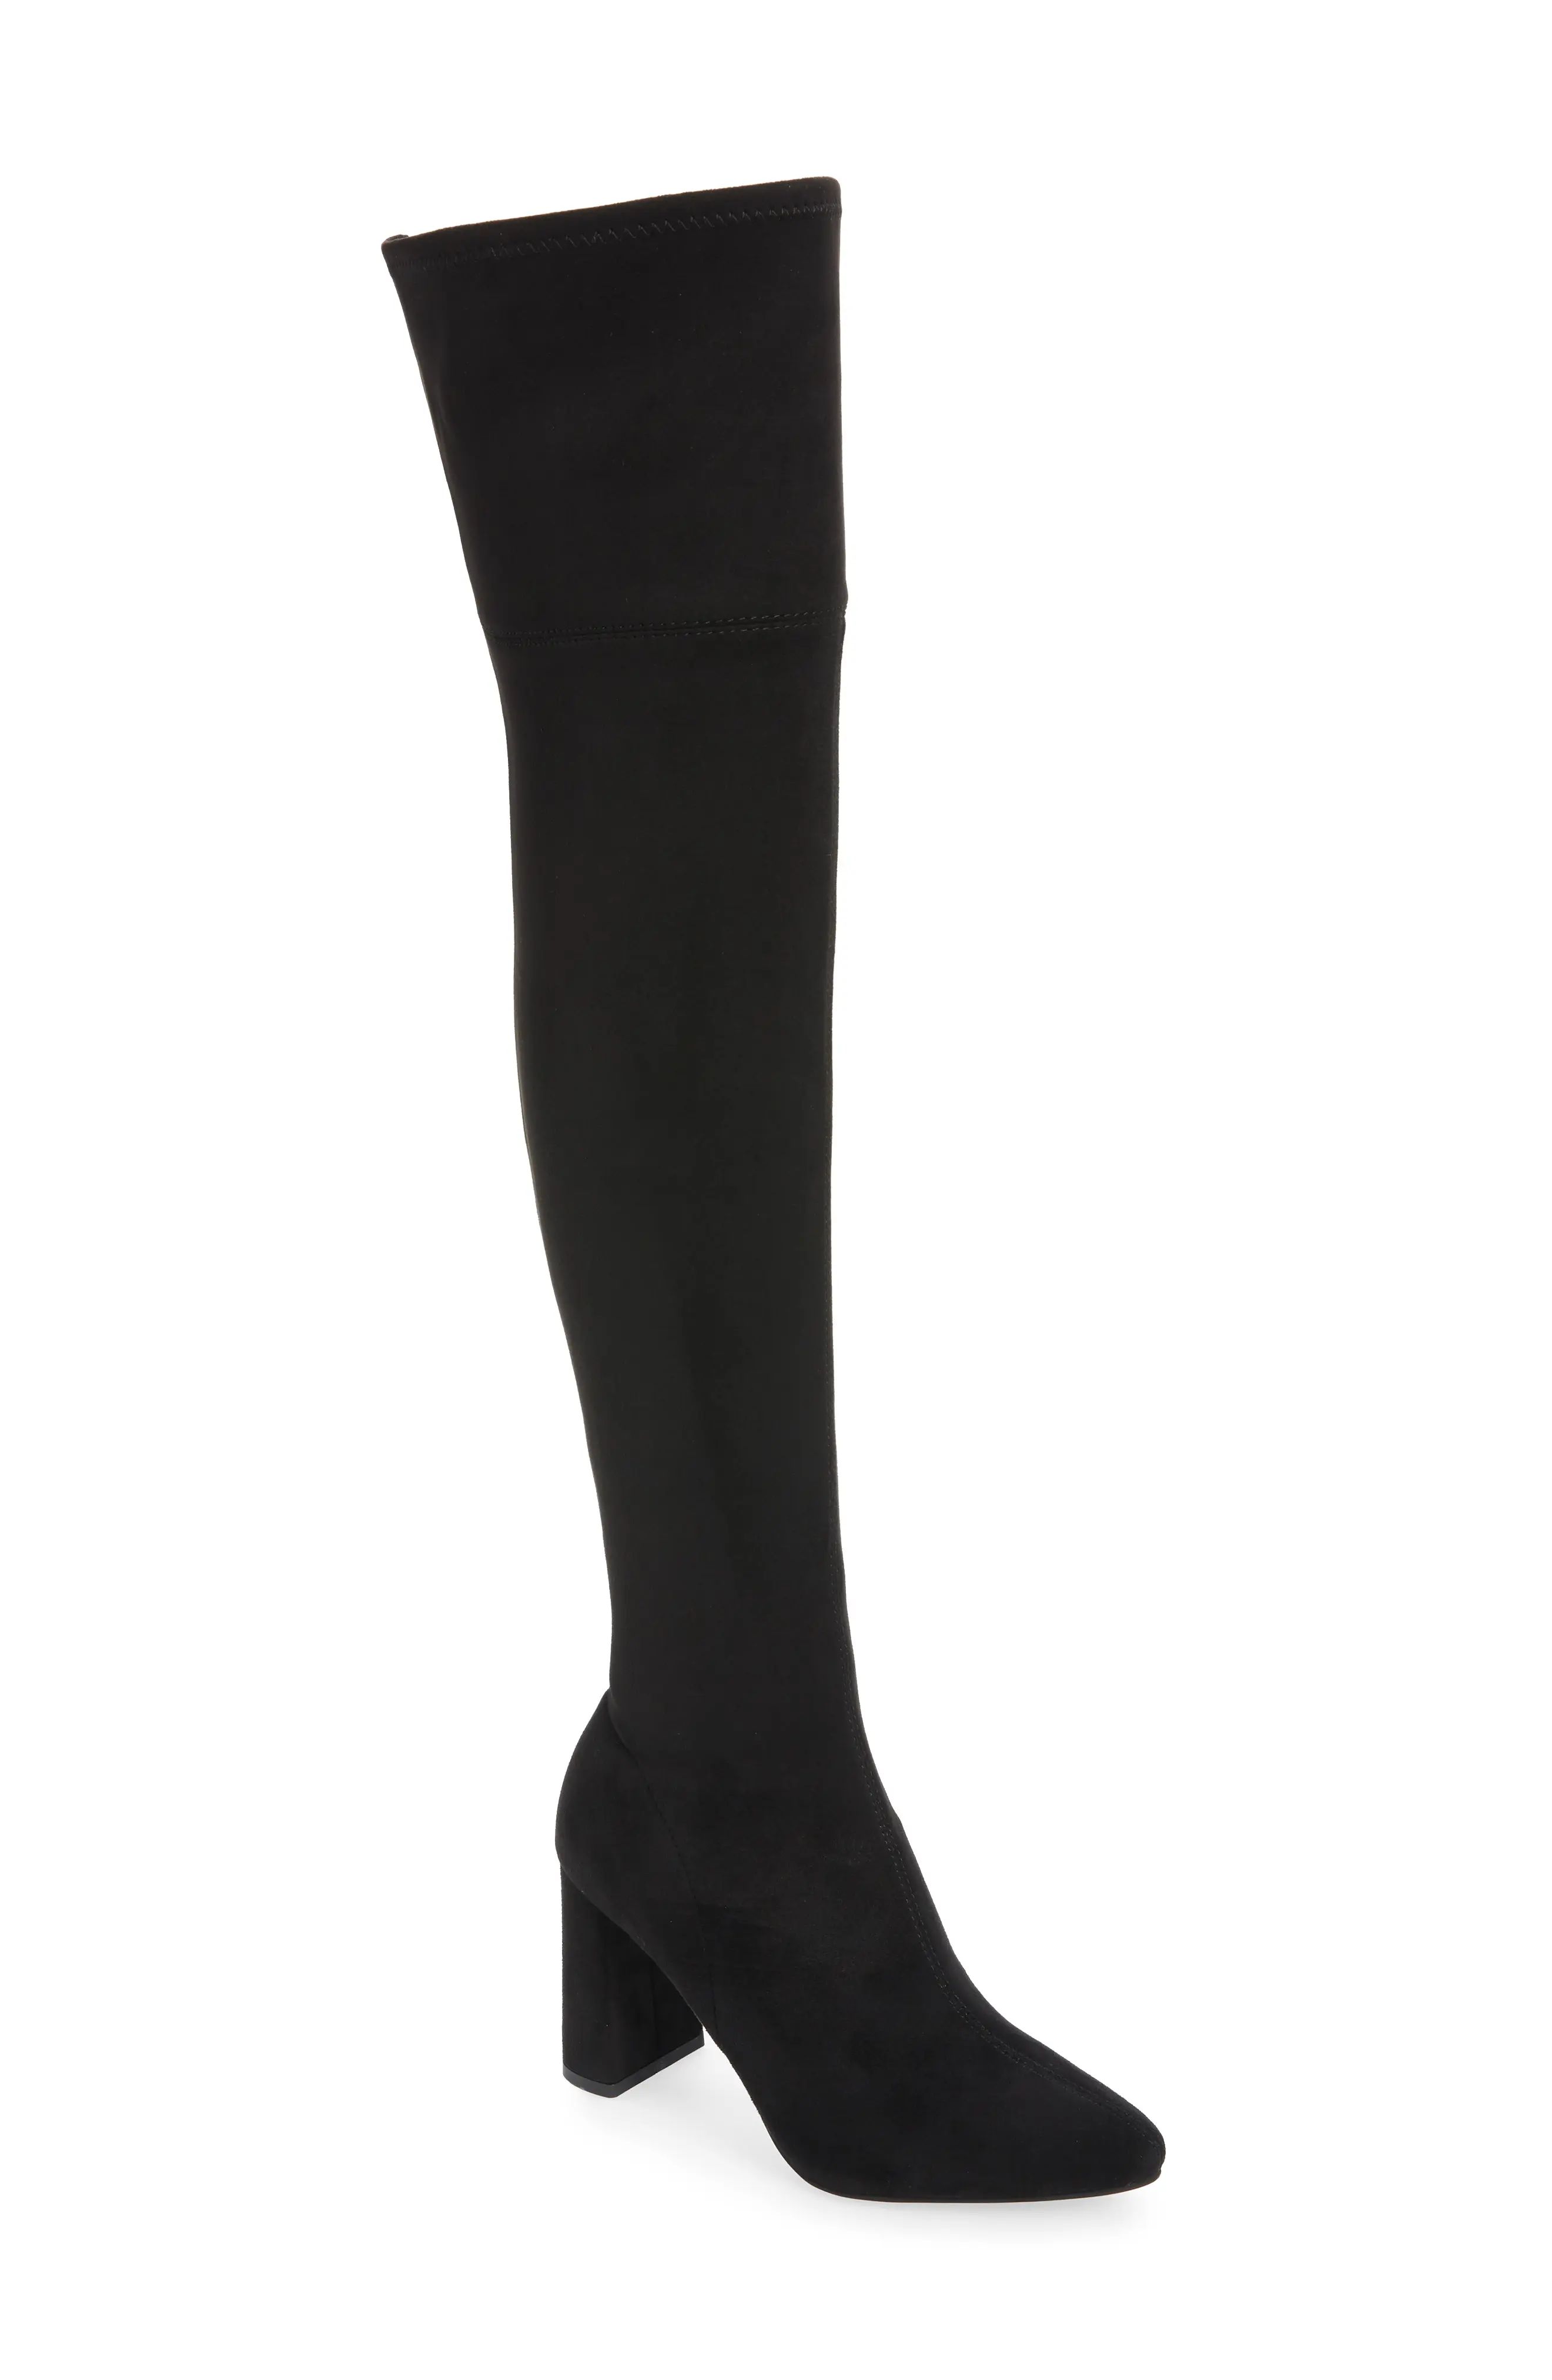 Jeffrey Campbell Parisah Over the Knee Boot in Black Suede at Nordstrom, Size 8.5 | Nordstrom